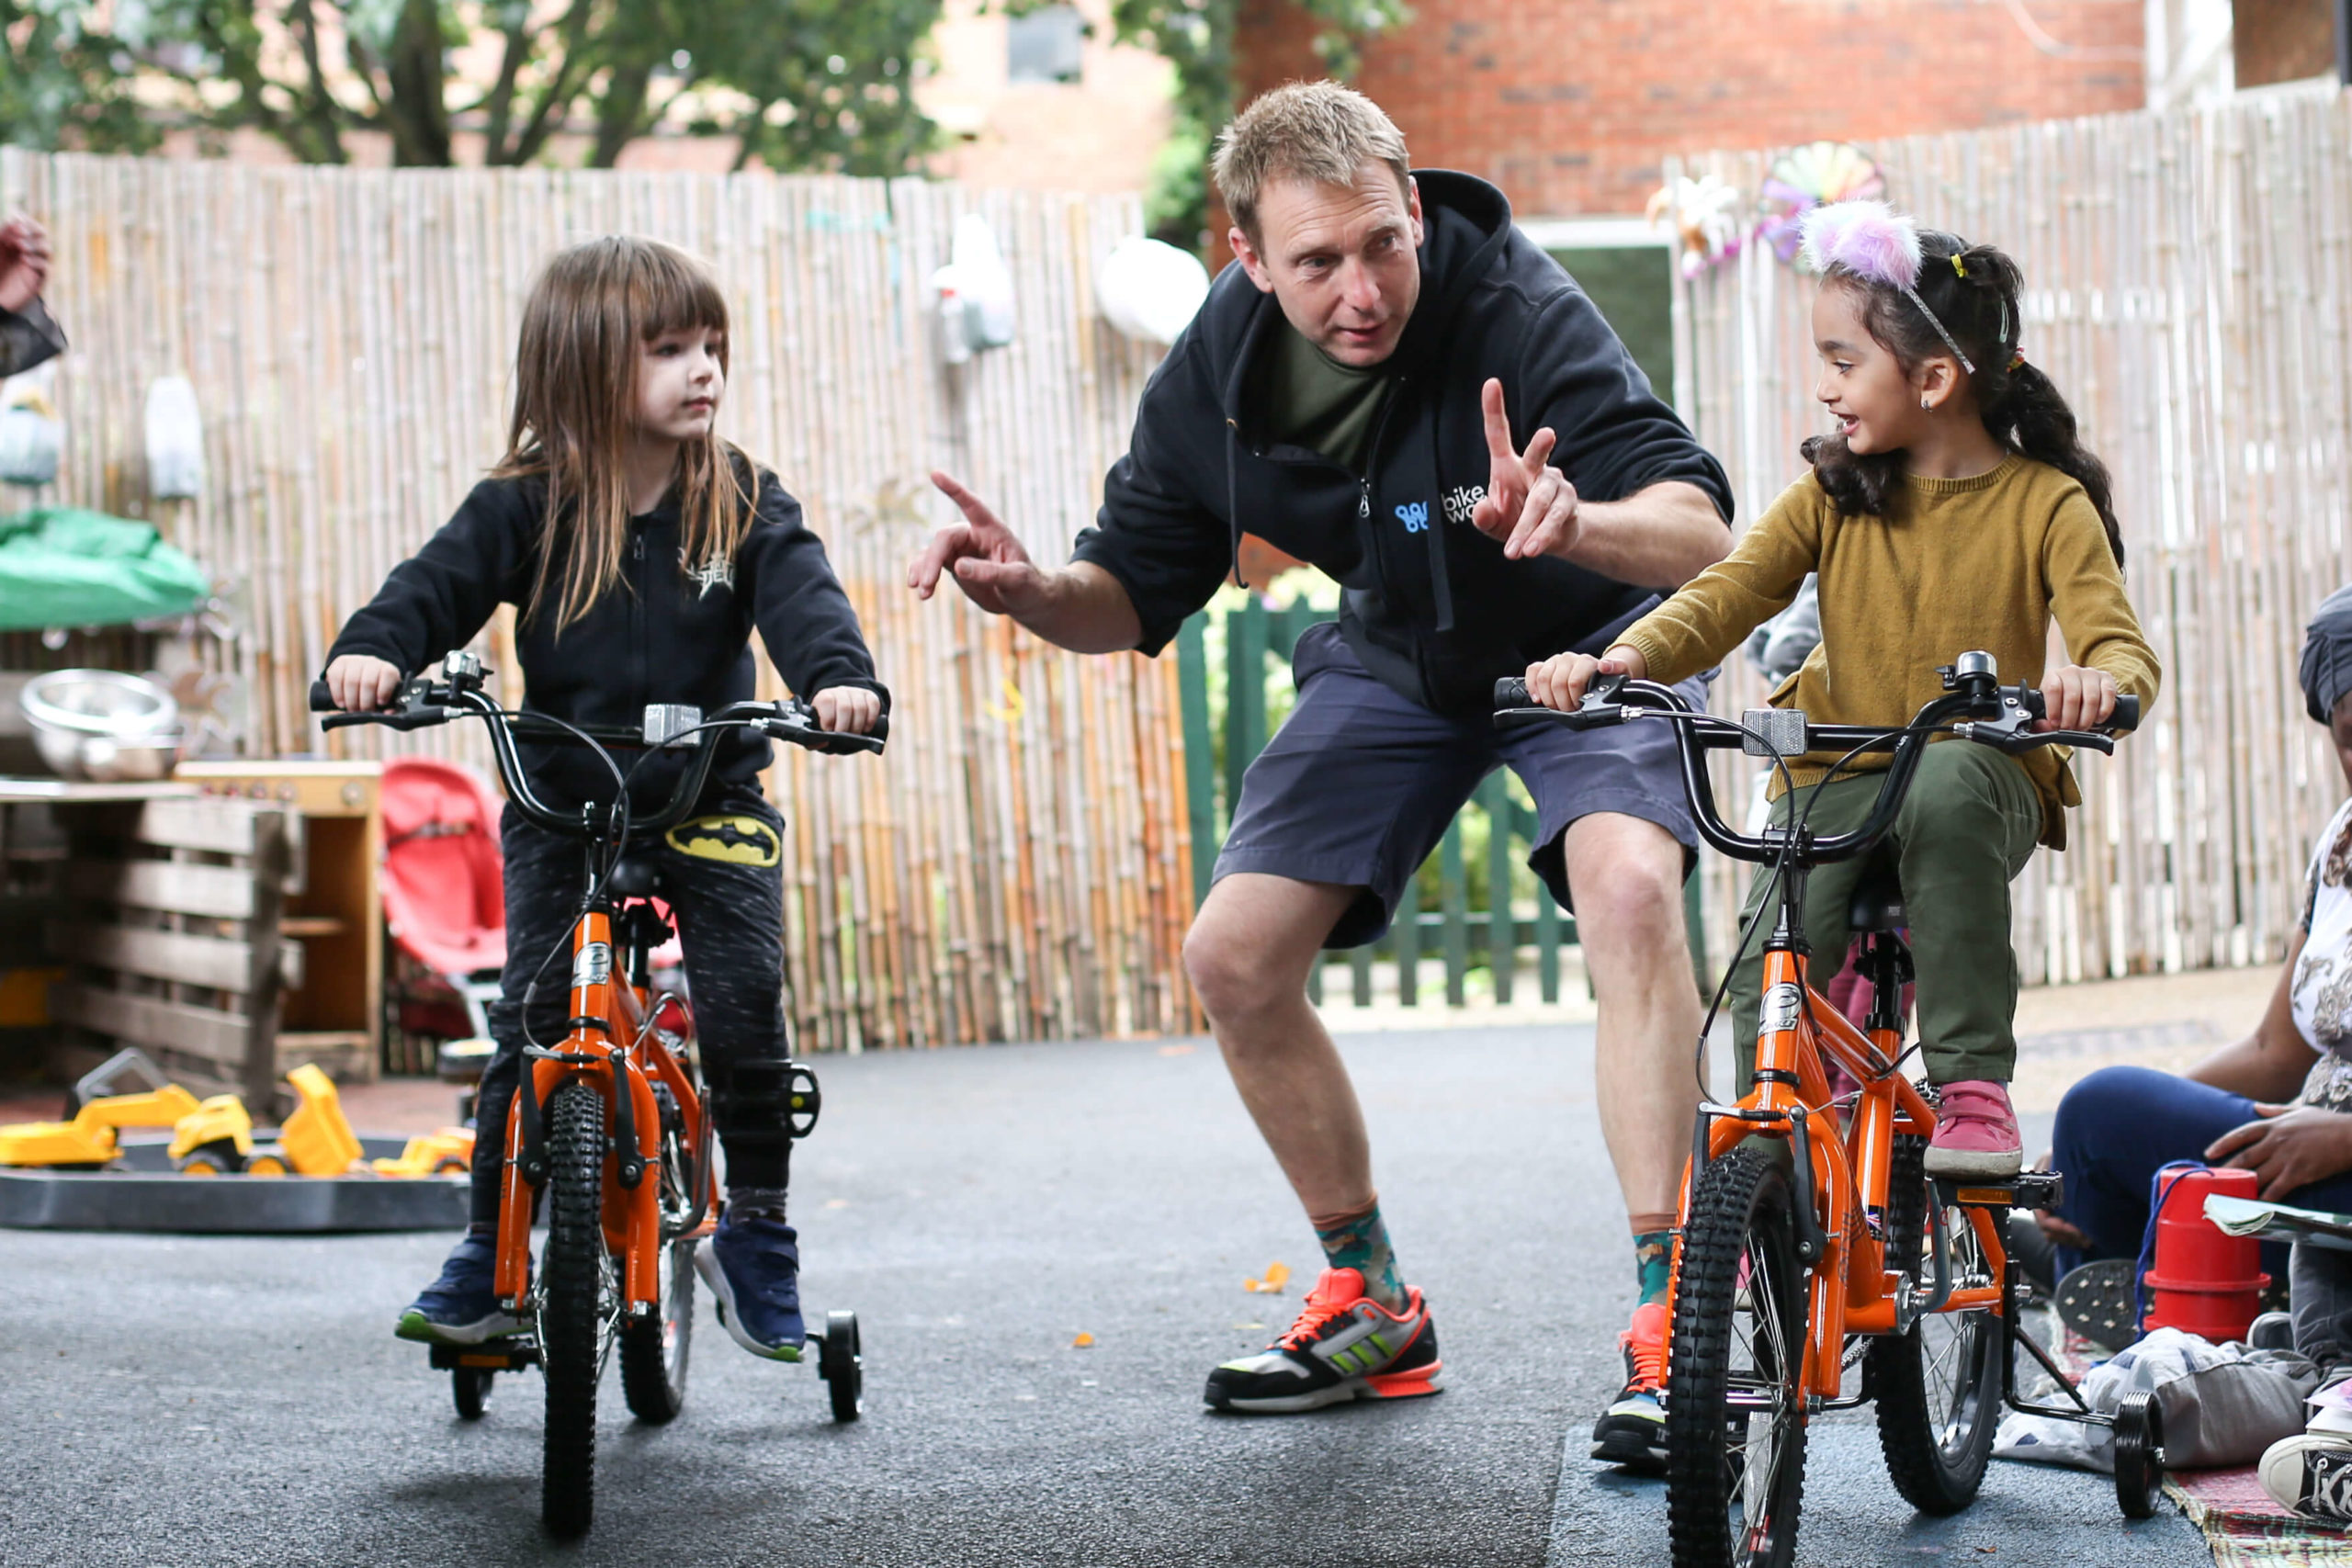 Jim at LEYF Nurseries with two early years students on cycles